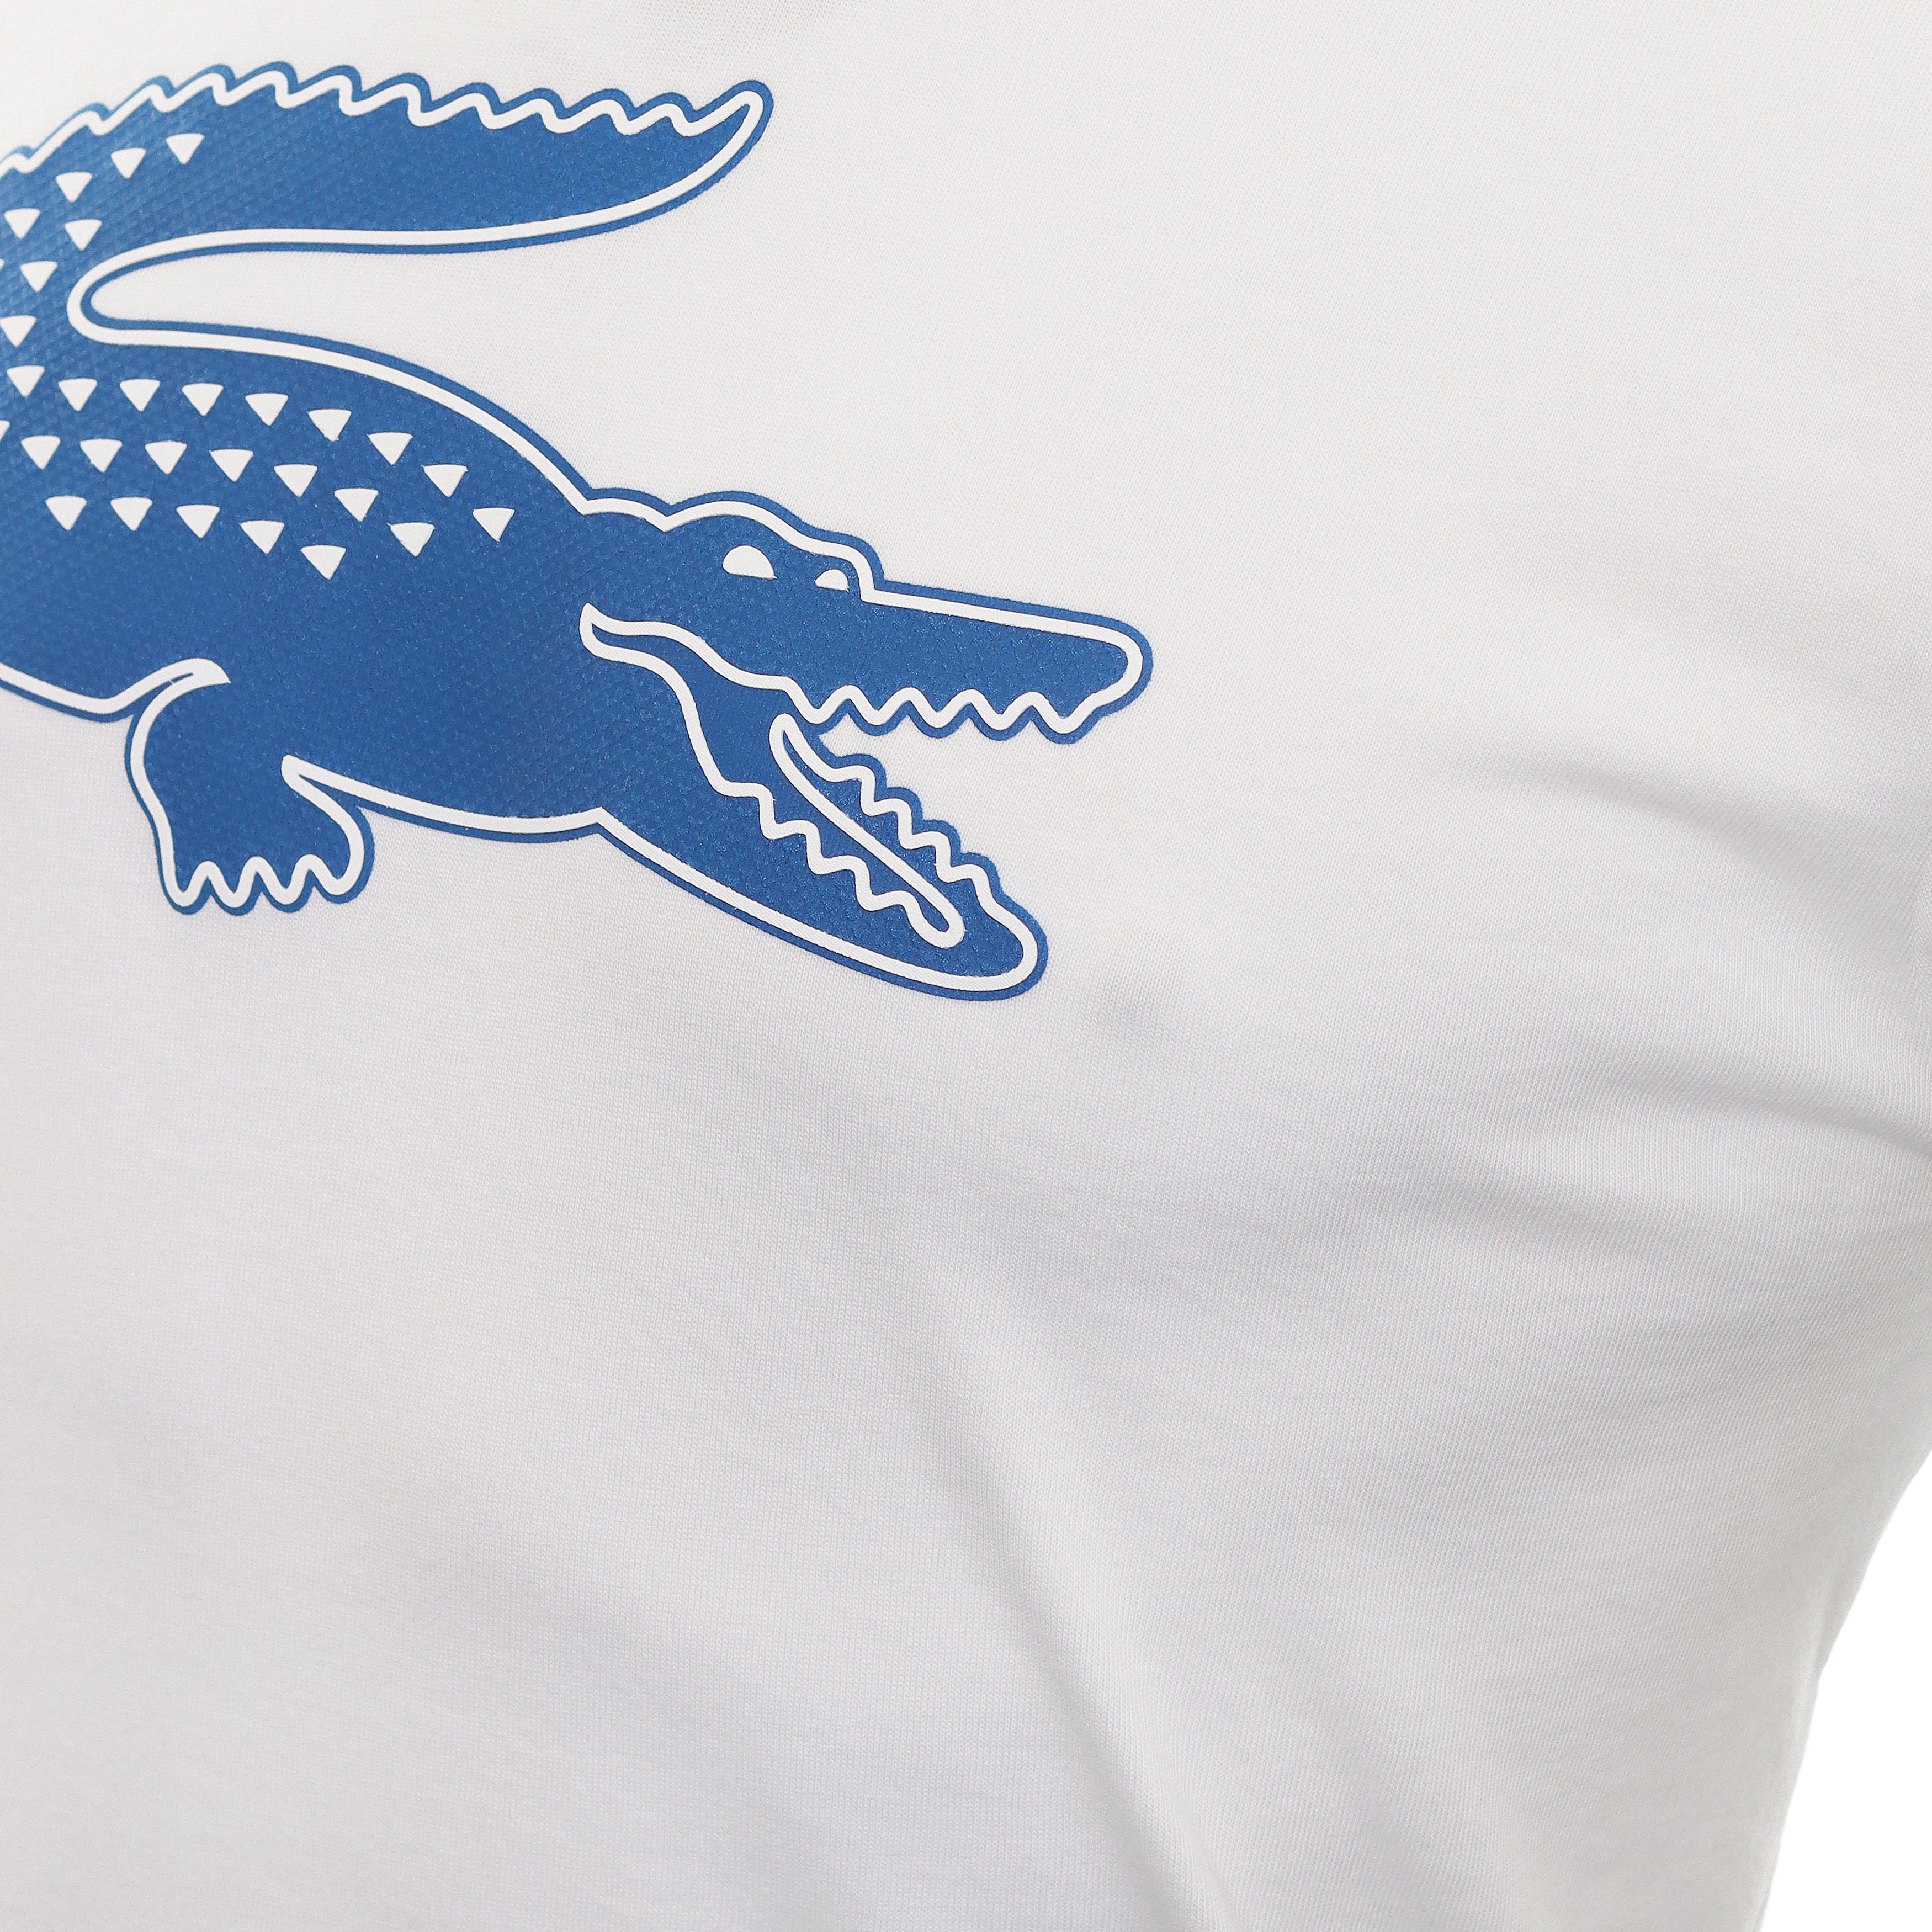 Lacoste Large Croc Print Tee Shirt TH2042 White Blue ANY | Function18 ...